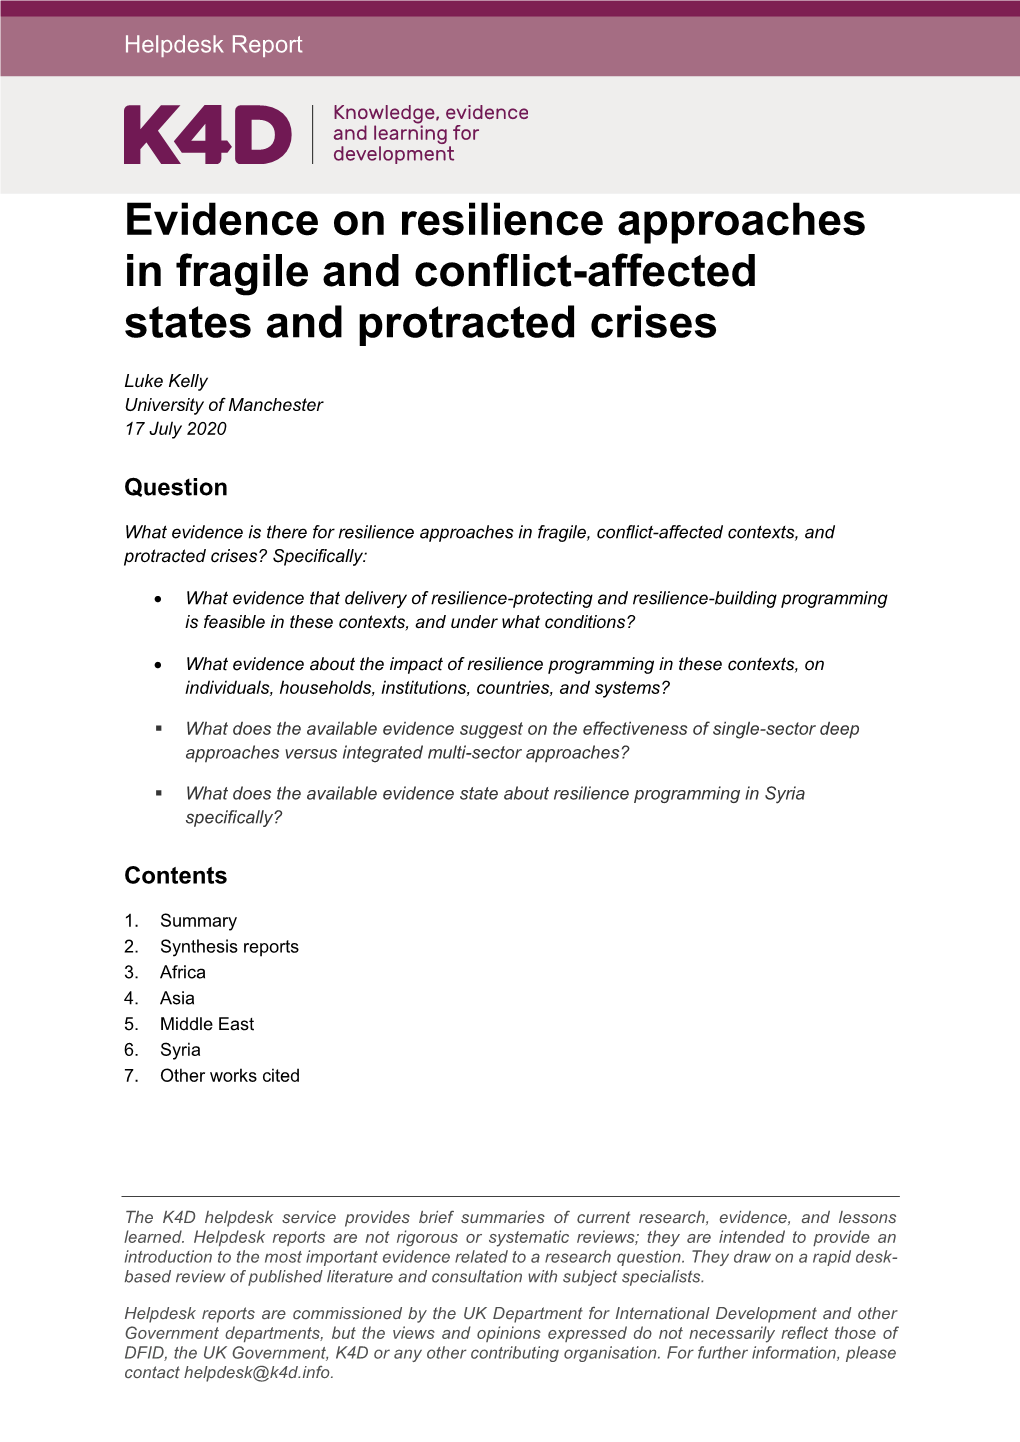 Evidence on Resilience Approaches in Fragile and Conflict-Affected States and Protracted Crises